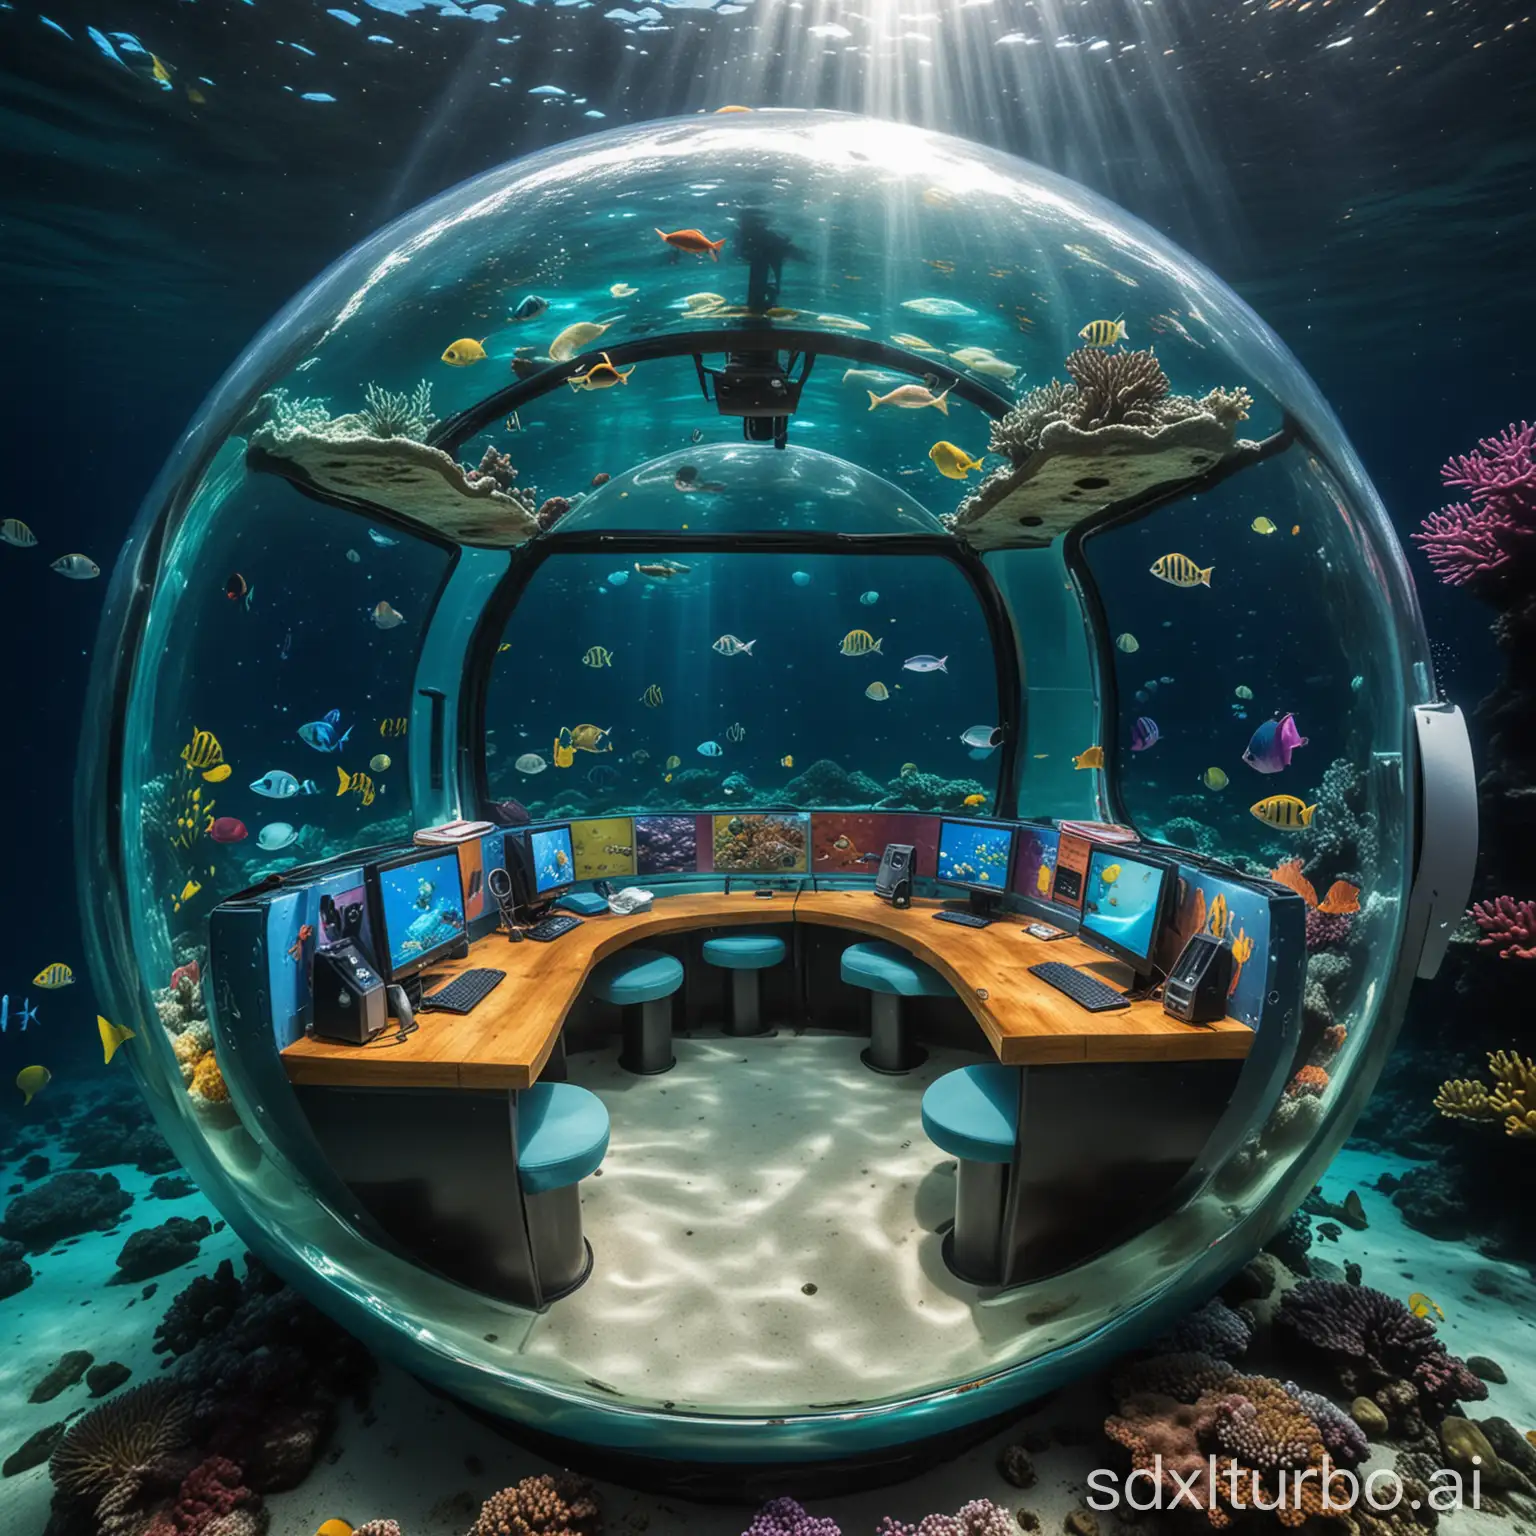 Underwater-Internet-Cafe-with-Colorful-Fish-and-Spherical-Design